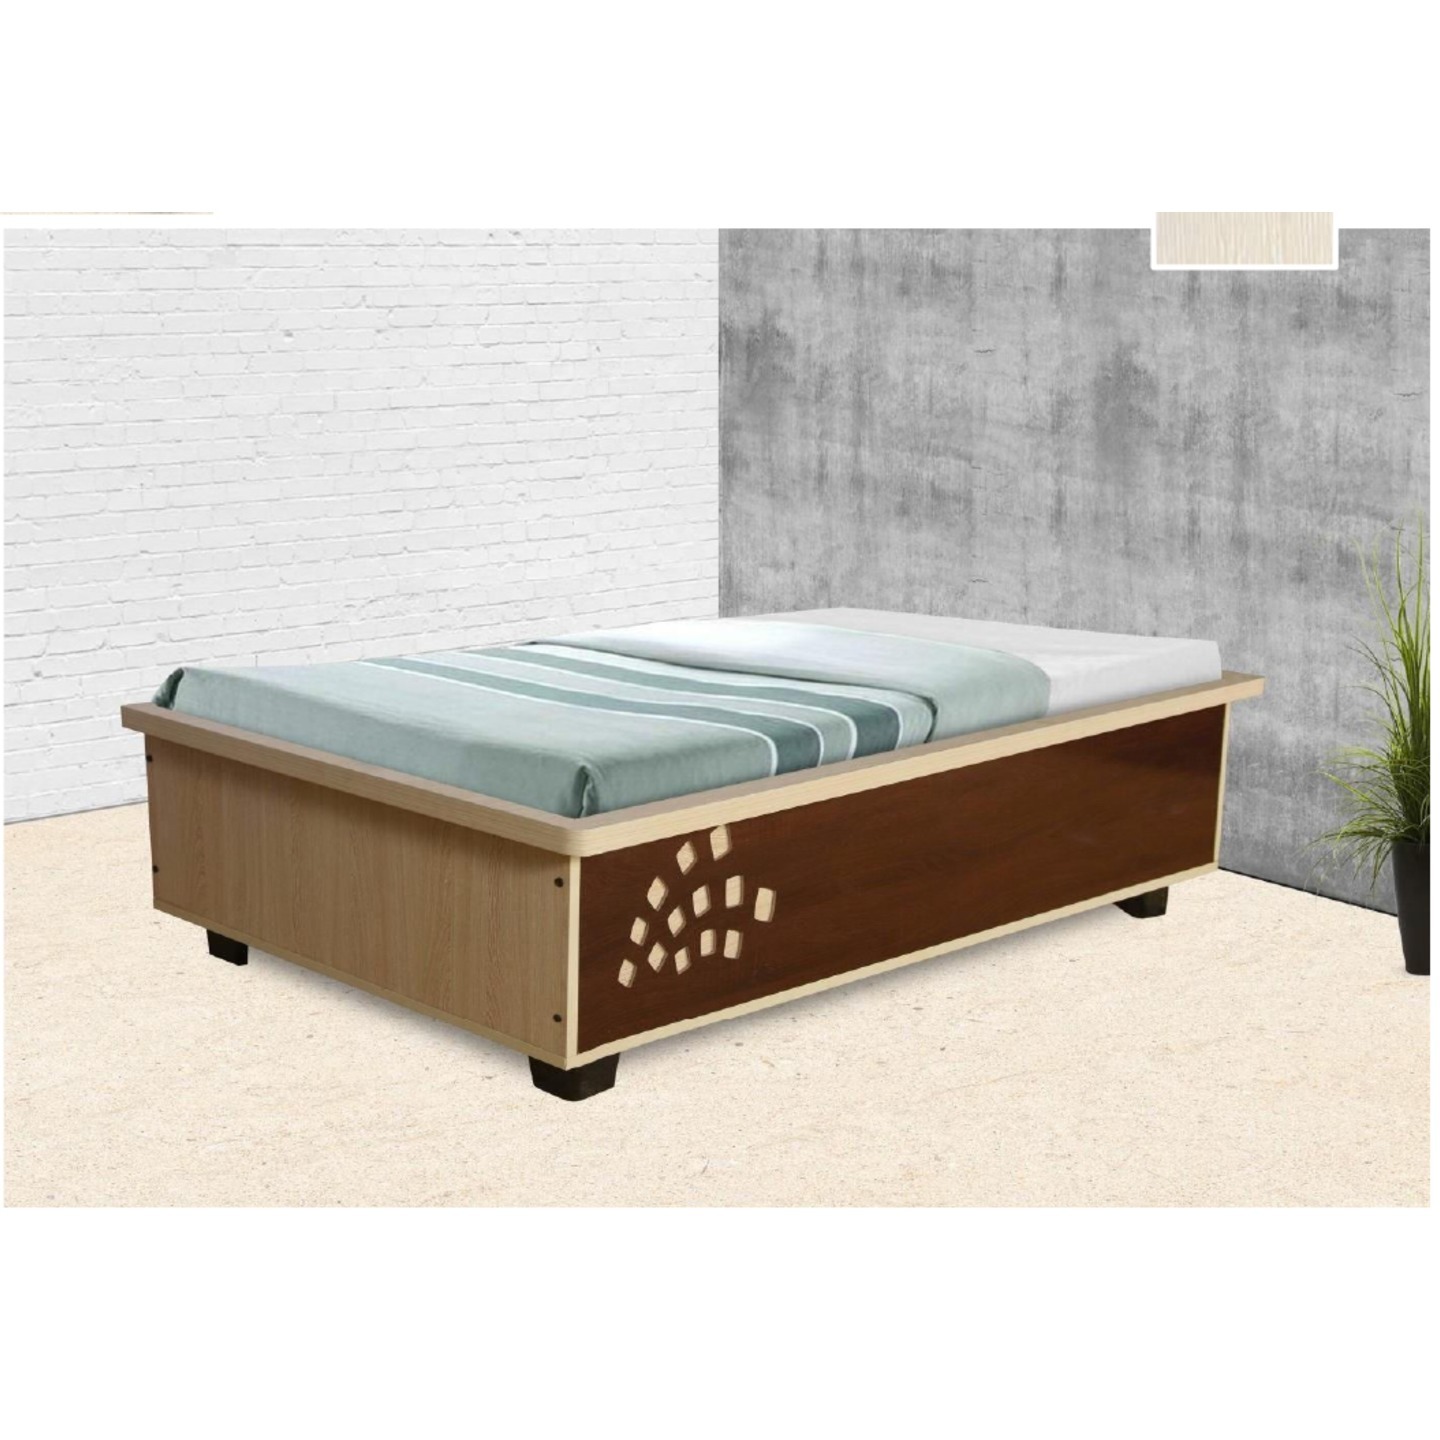 HS Single Bed Size 72"x36" Sweet Dream In Brown Colour